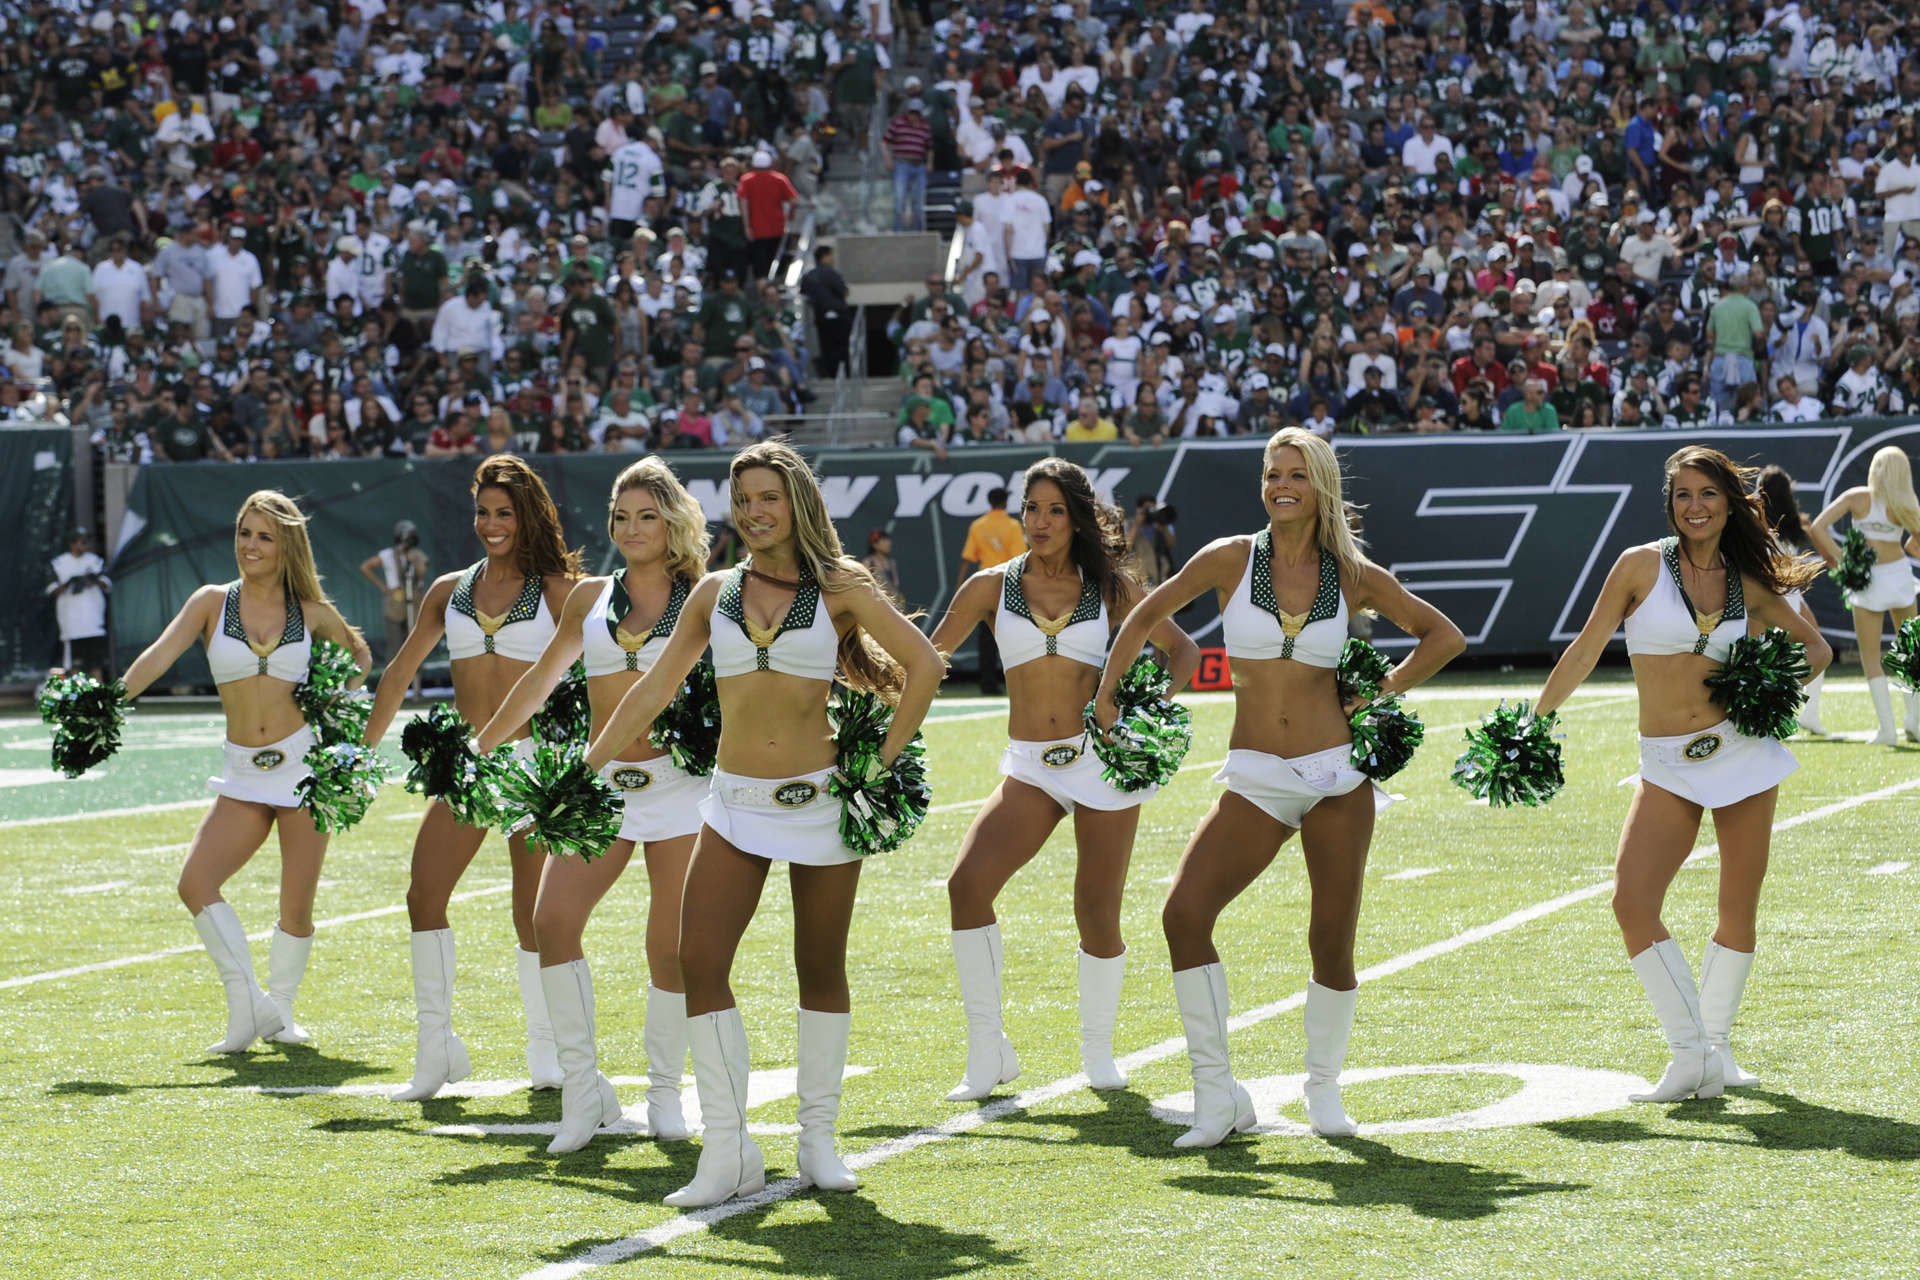 1920x1280 Download New York Jets Cheerleader Roster 2013 in high quality wallpaper.  And You can find